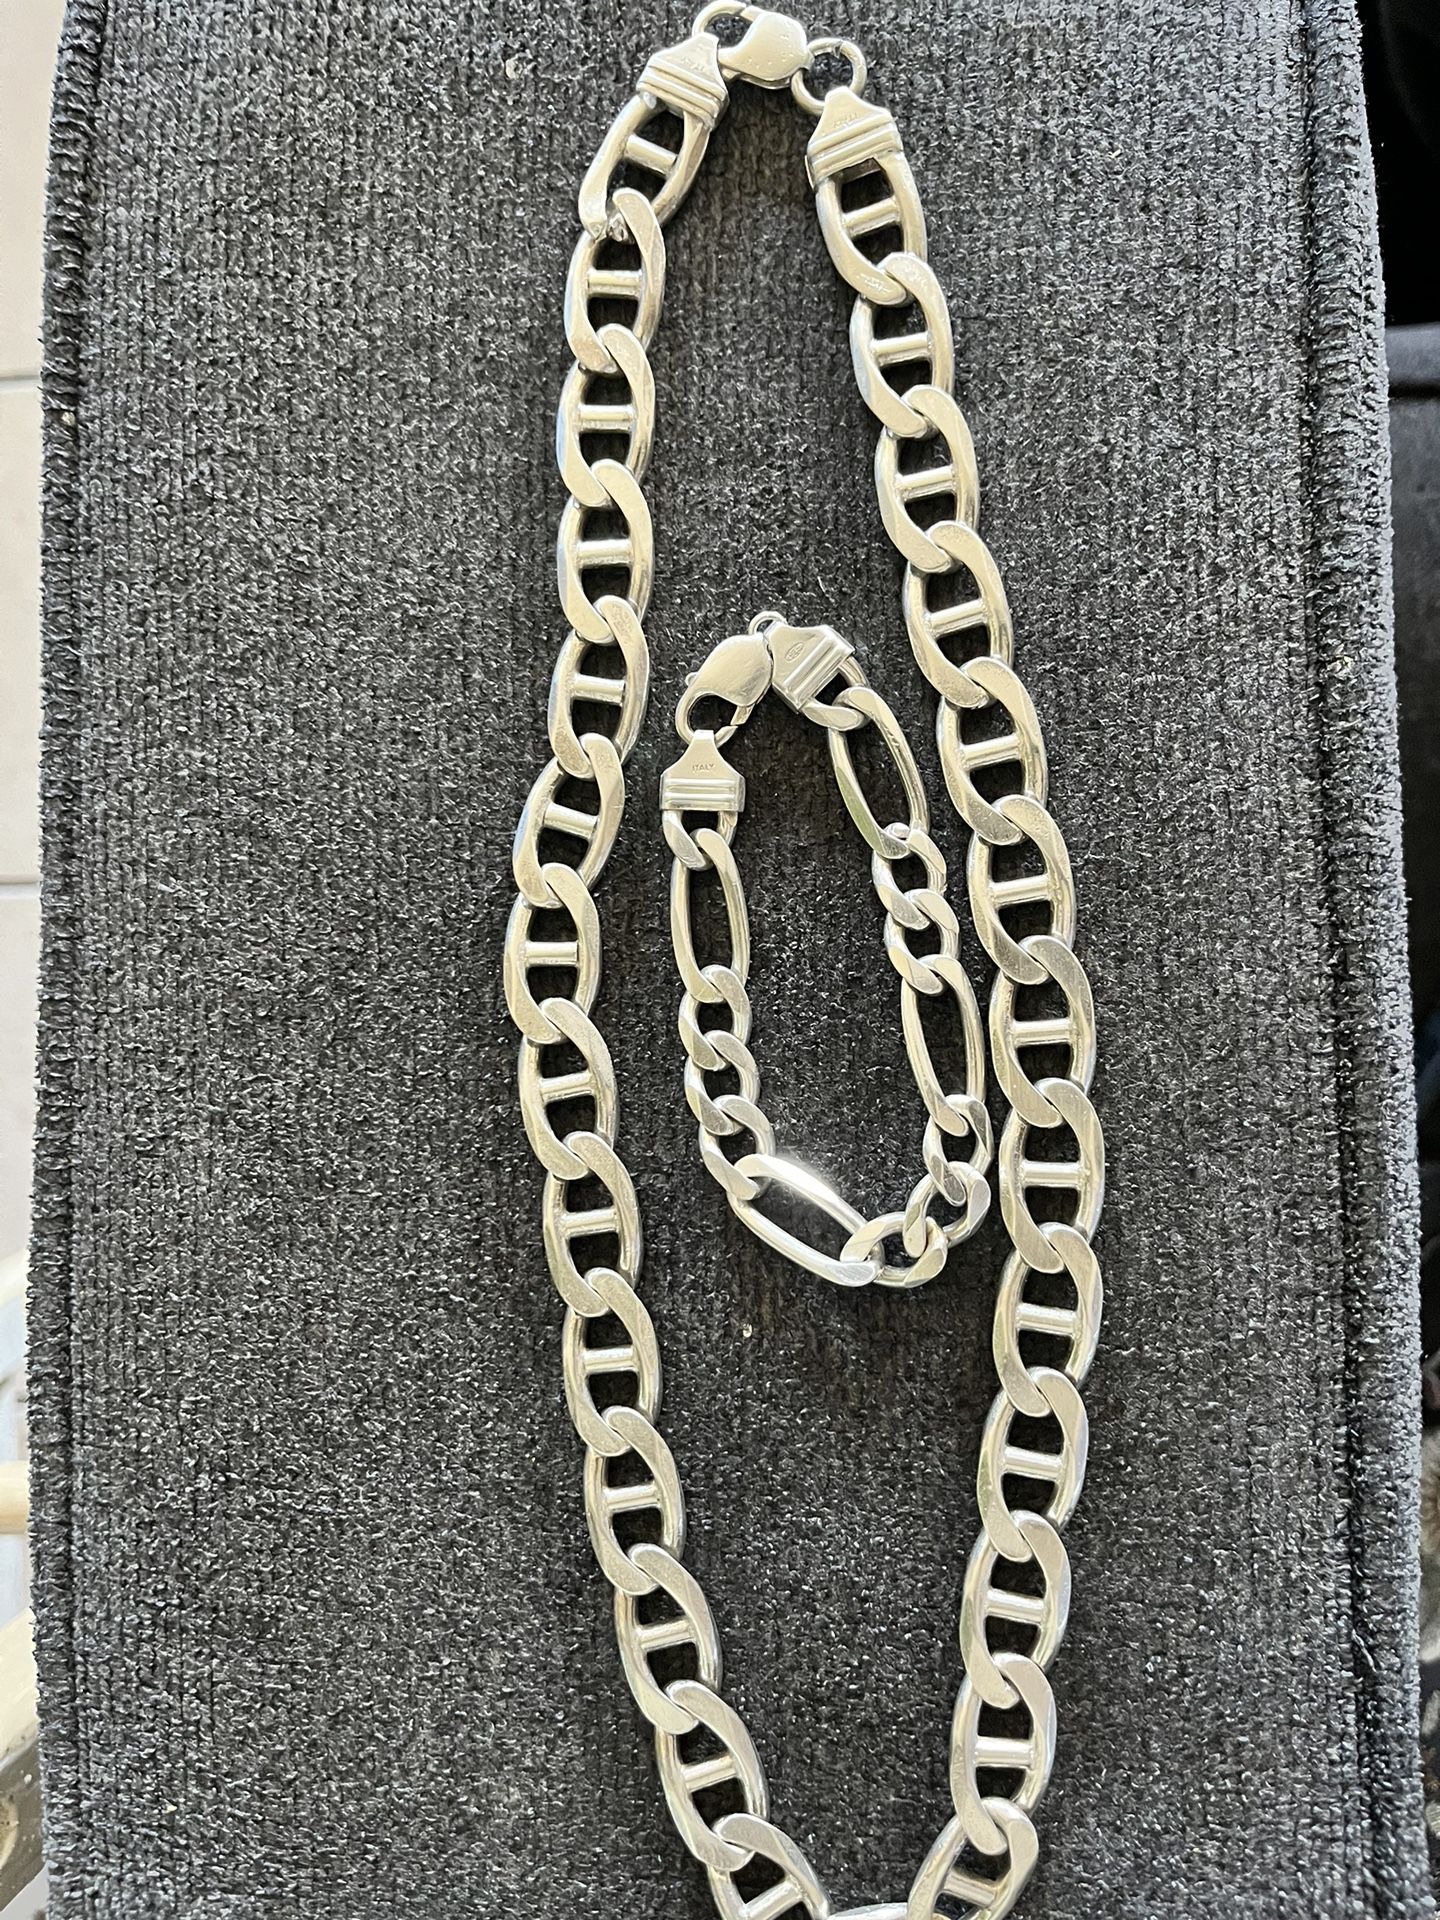 925” Real Silver Chain And Bracket. Used But Good.  